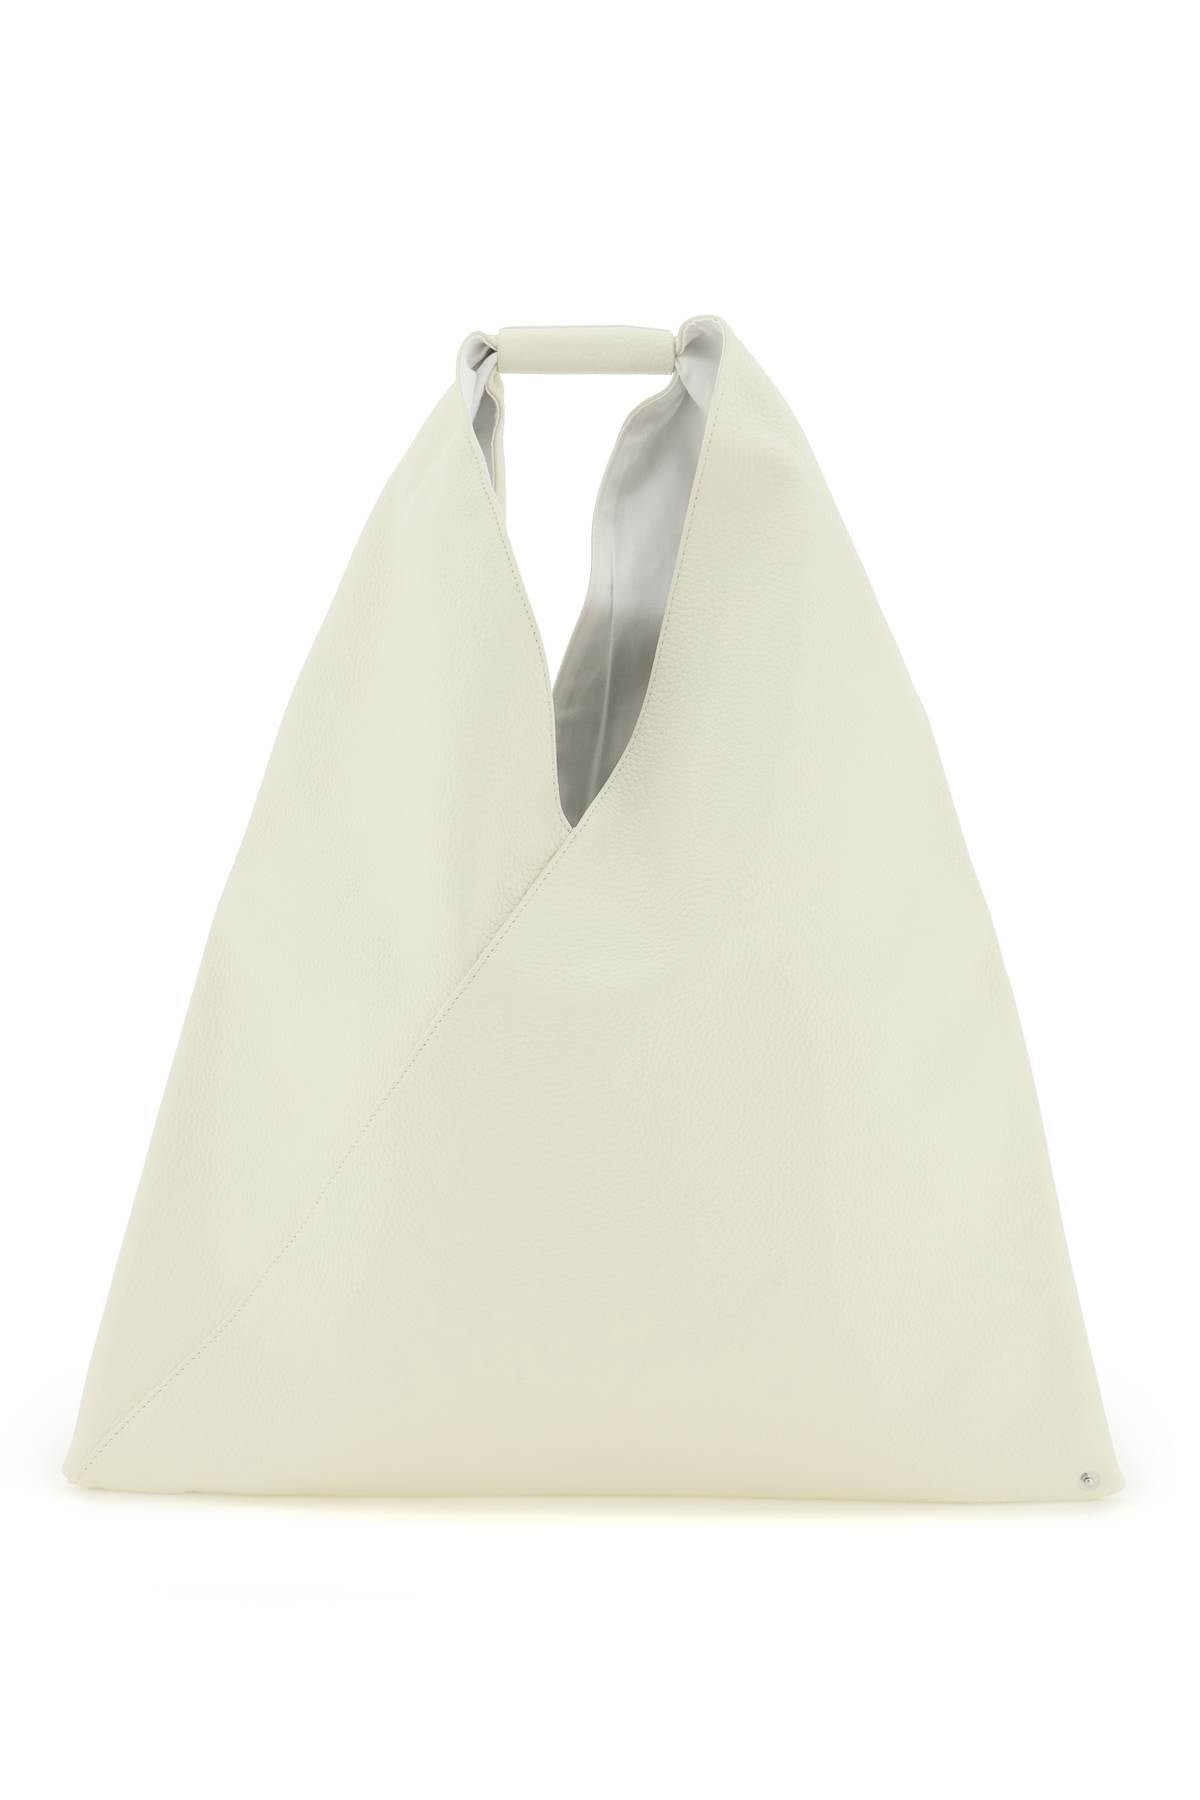 MM6 MAISON MARGIELA Contemporary White Leather Handbag with Unique Shape and Stylish Details for Women - SS24